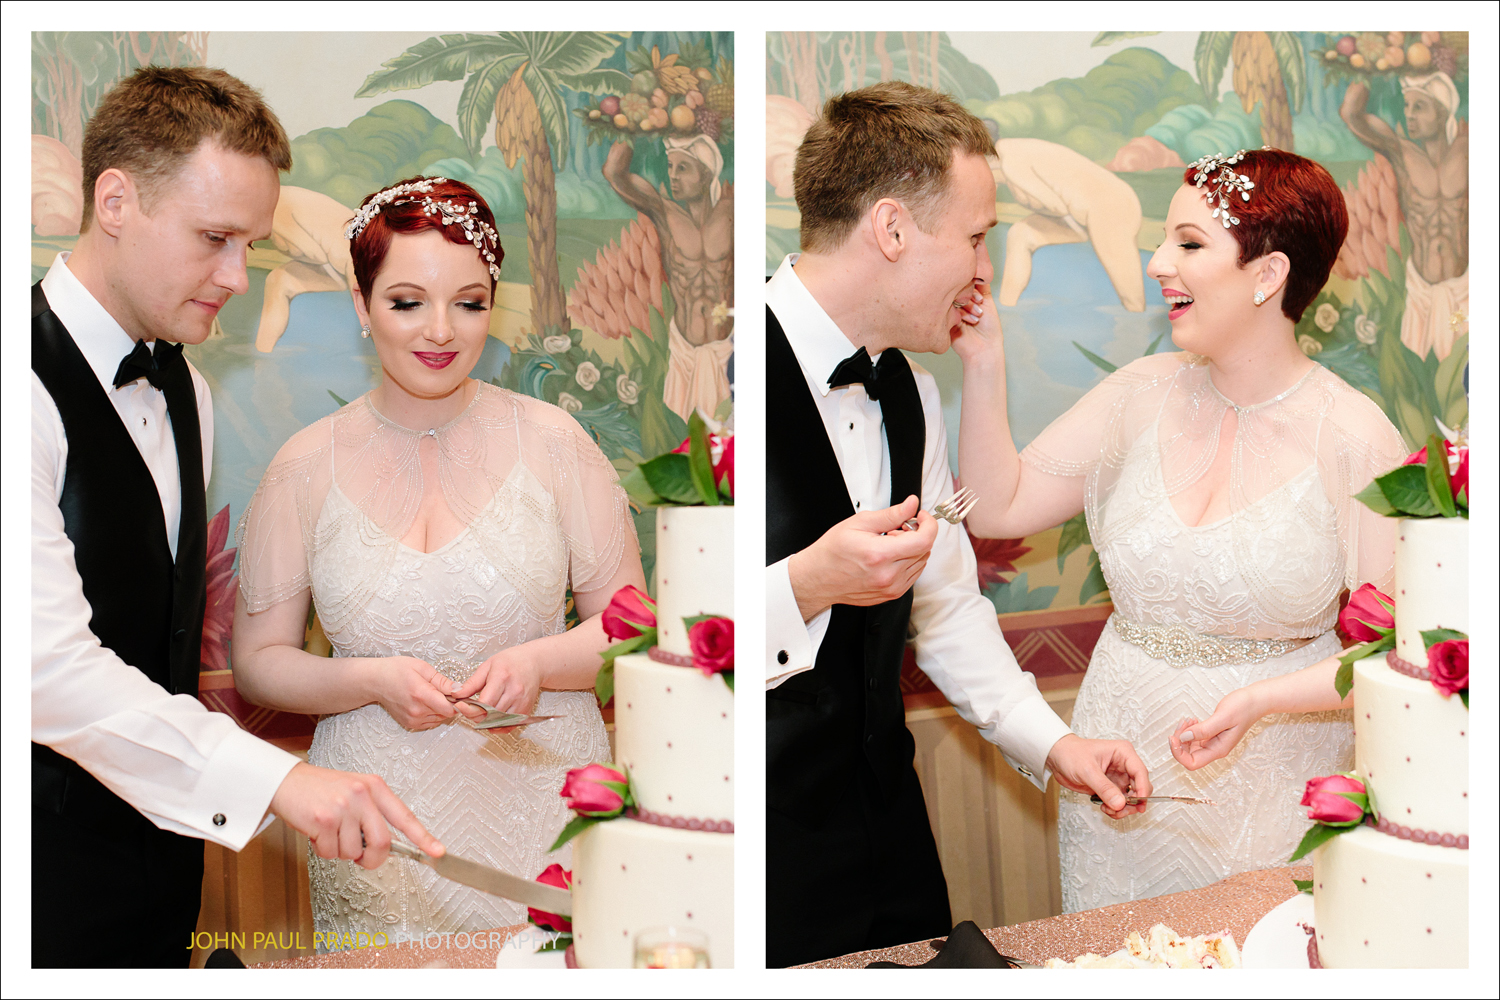 Cake cutting for bride and groom